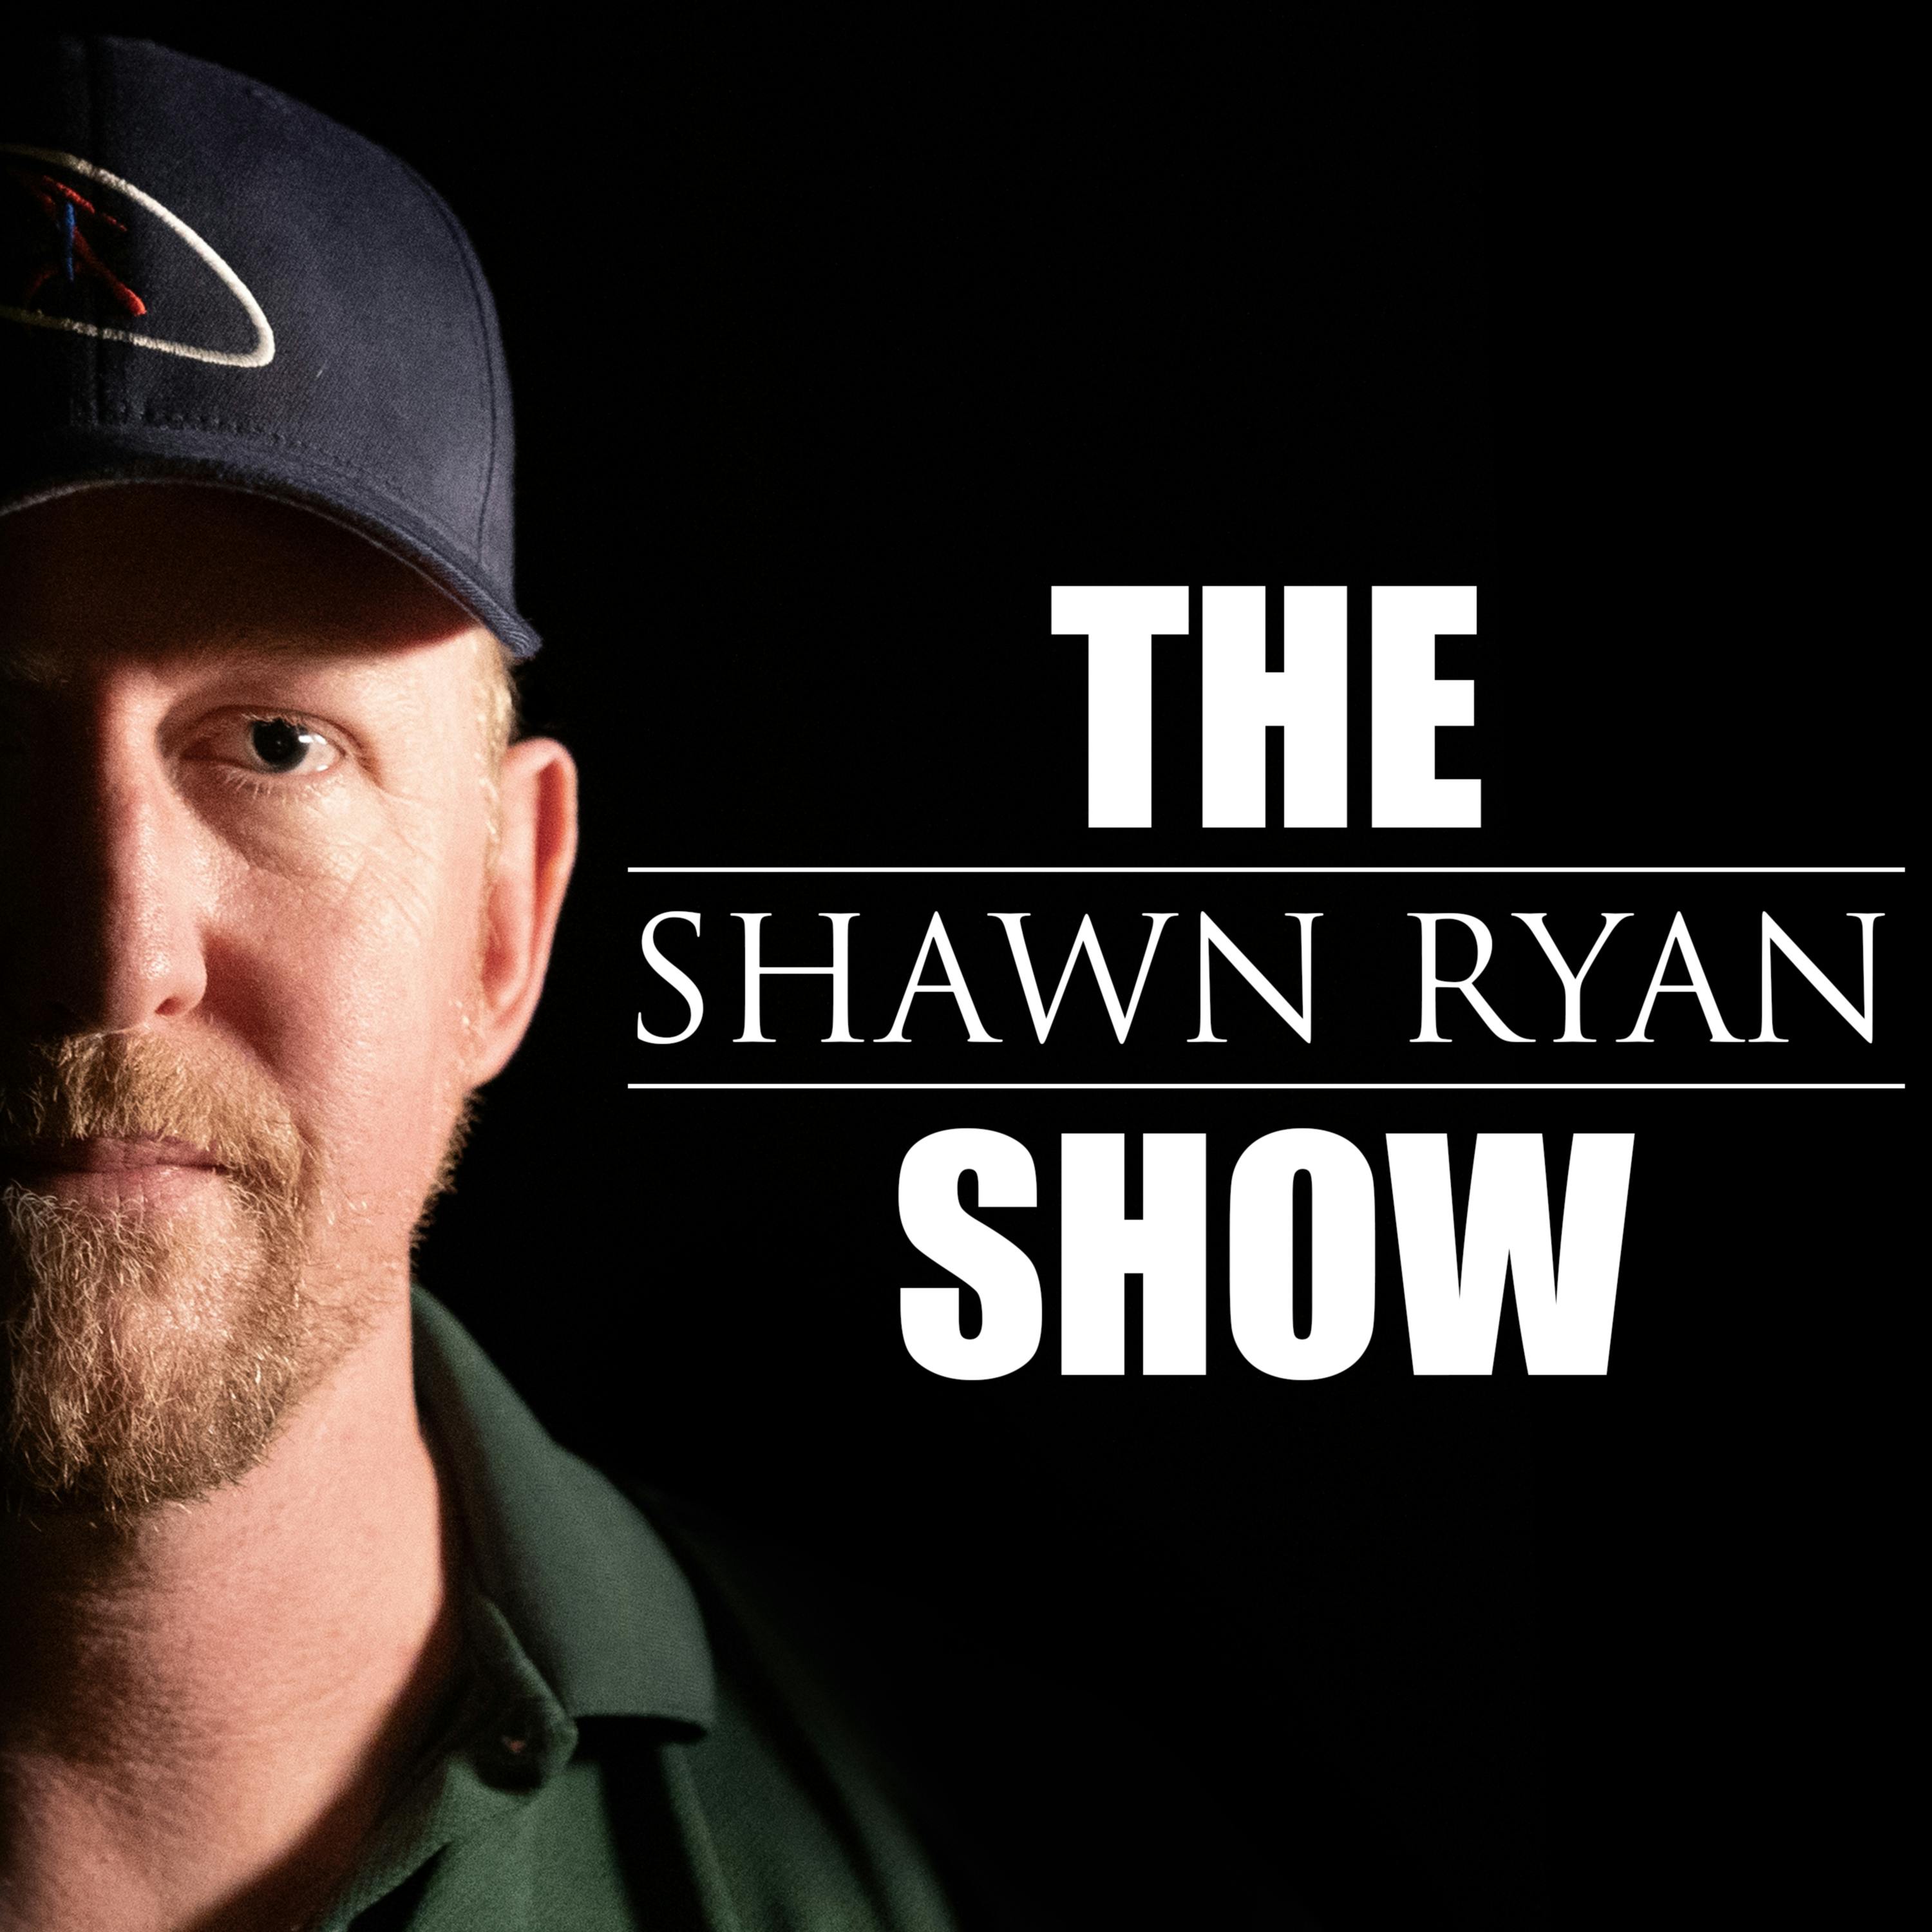 #27 Rob O'Neill - The Man Who Killed Bin Laden by Shawn Ryan | Cumulus Podcast Network